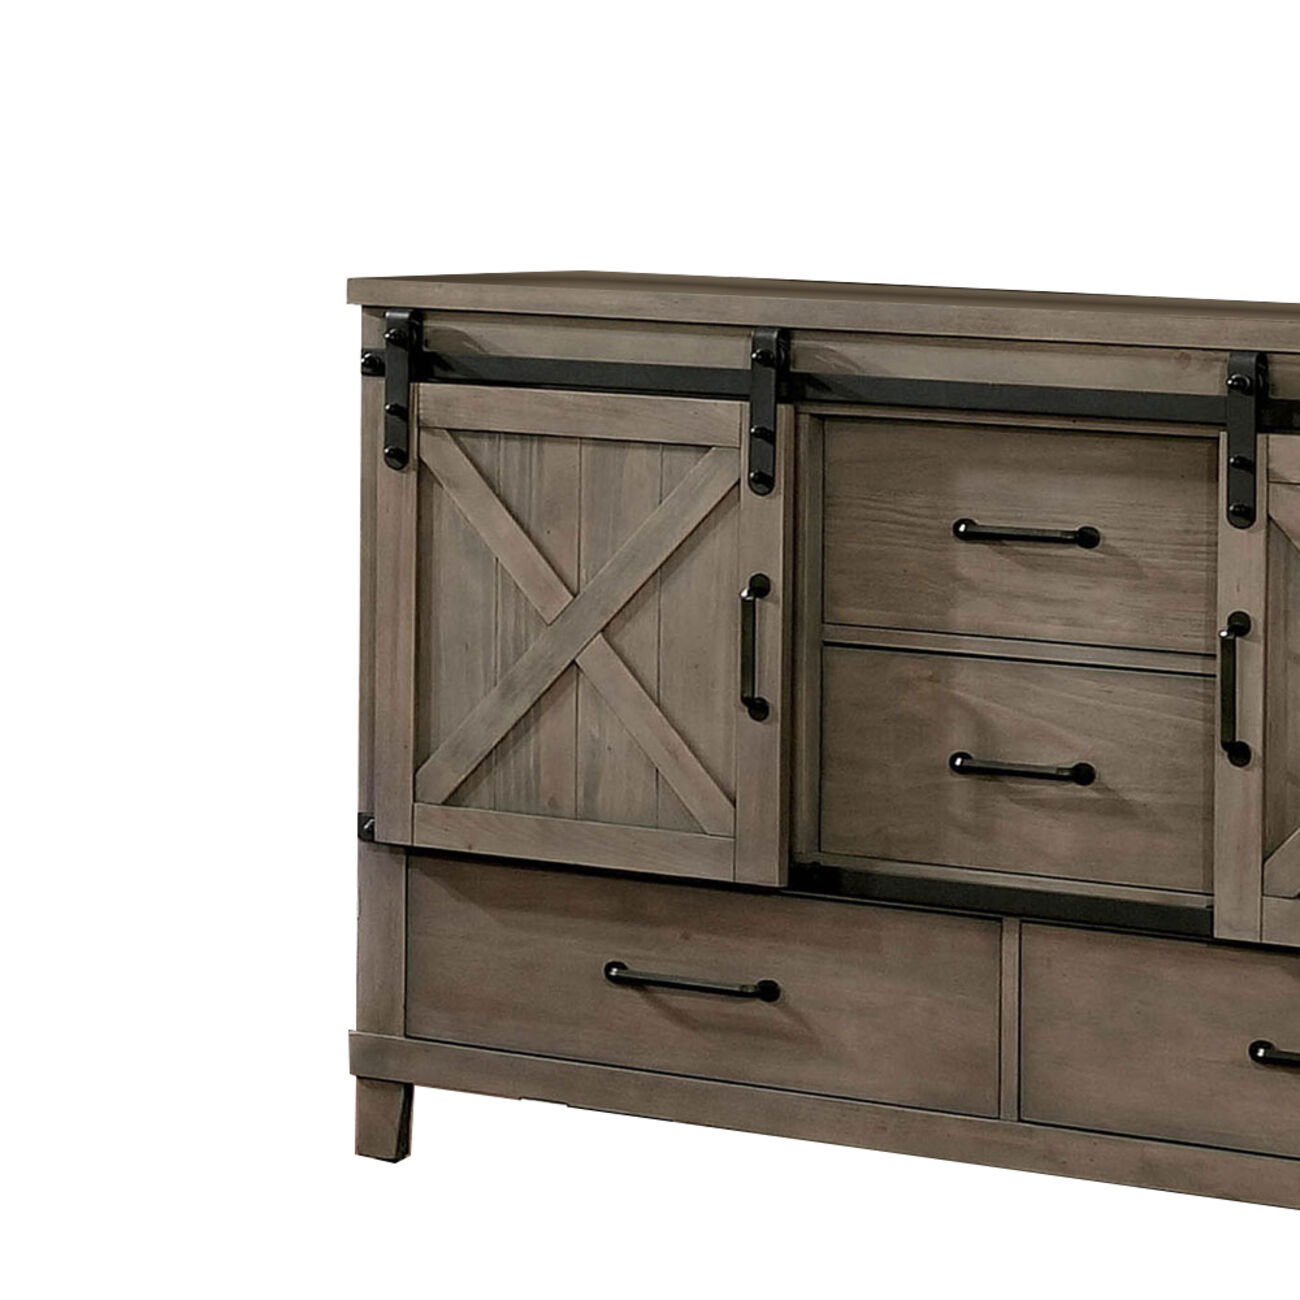 Wood and Metal Dresser with Sliding Cabinets, Taupe Brown and Black